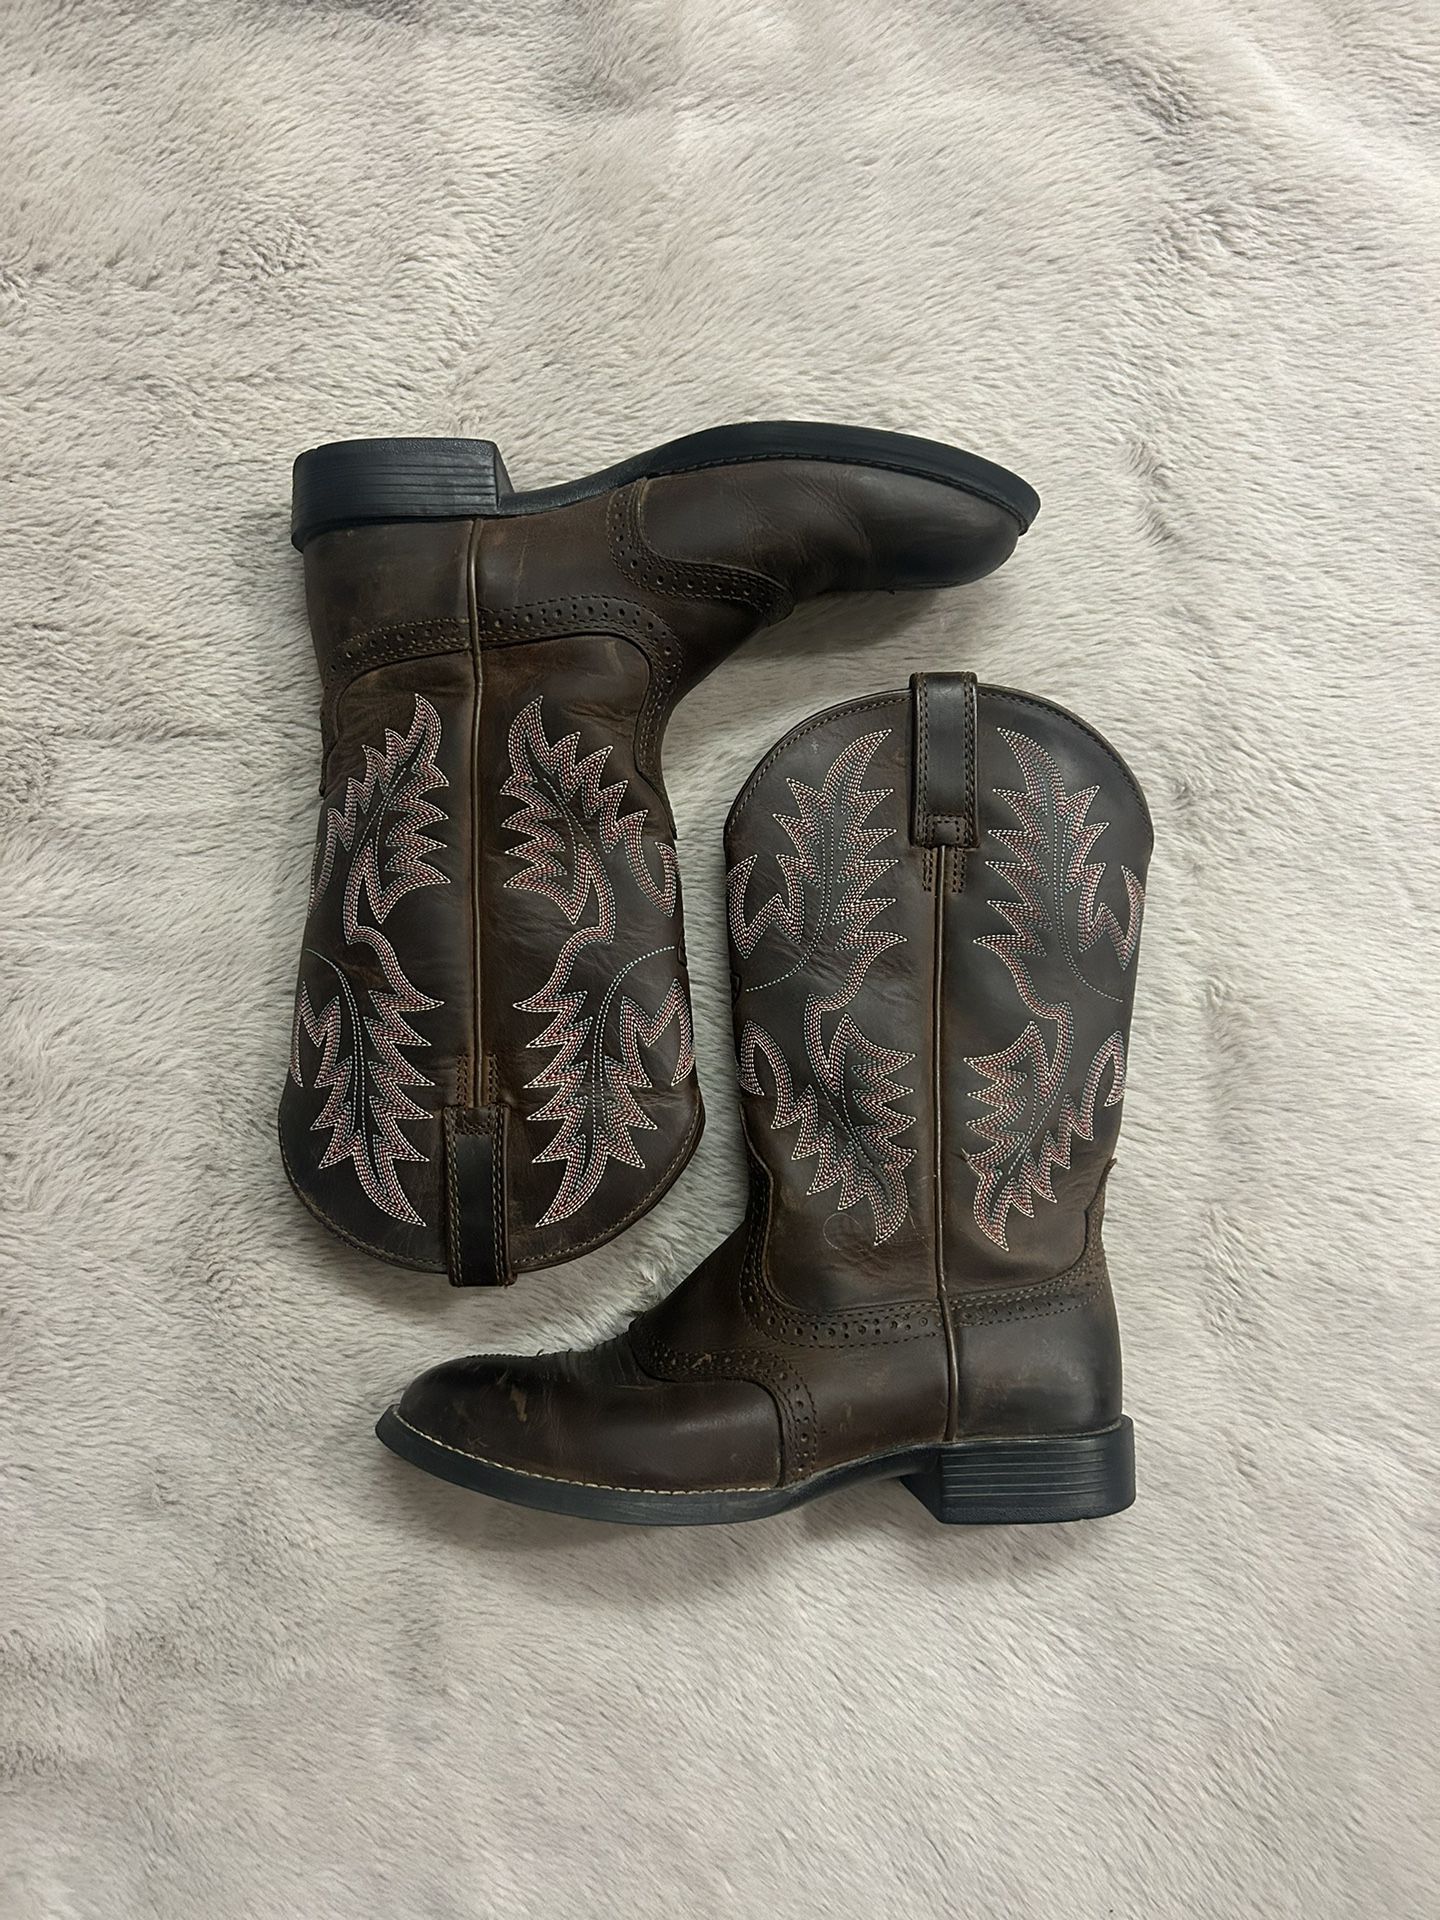 Brown And Pink Cowboy Boots Woman’s Size 7!